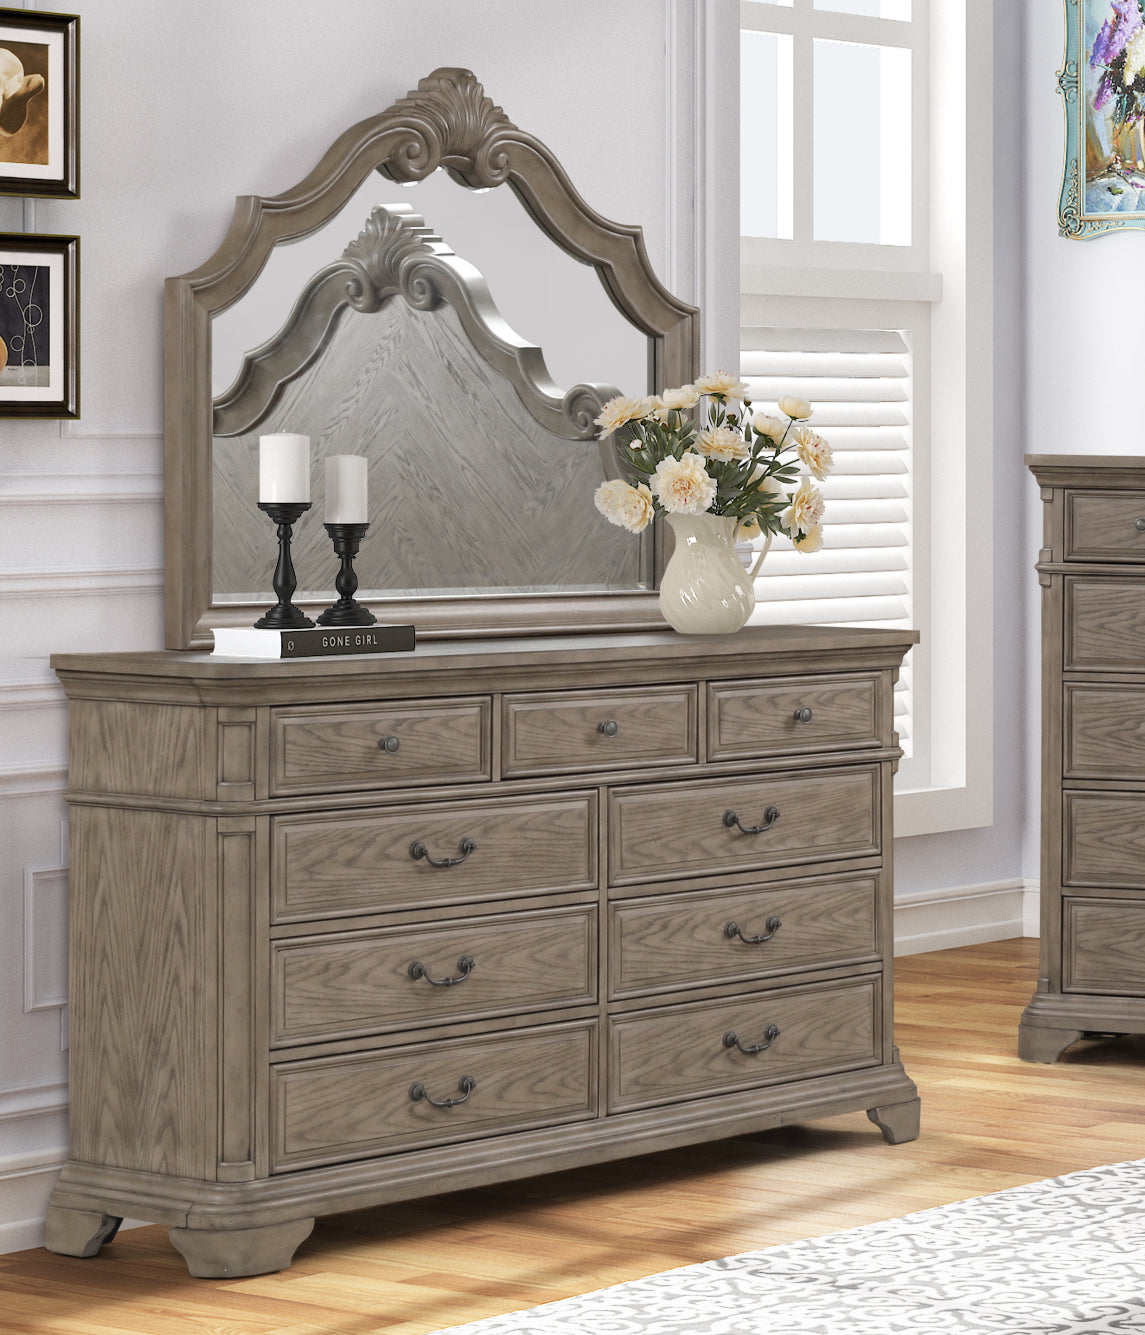 Levan 9-Drawer Wood Dresser with Mirror in Light Gray